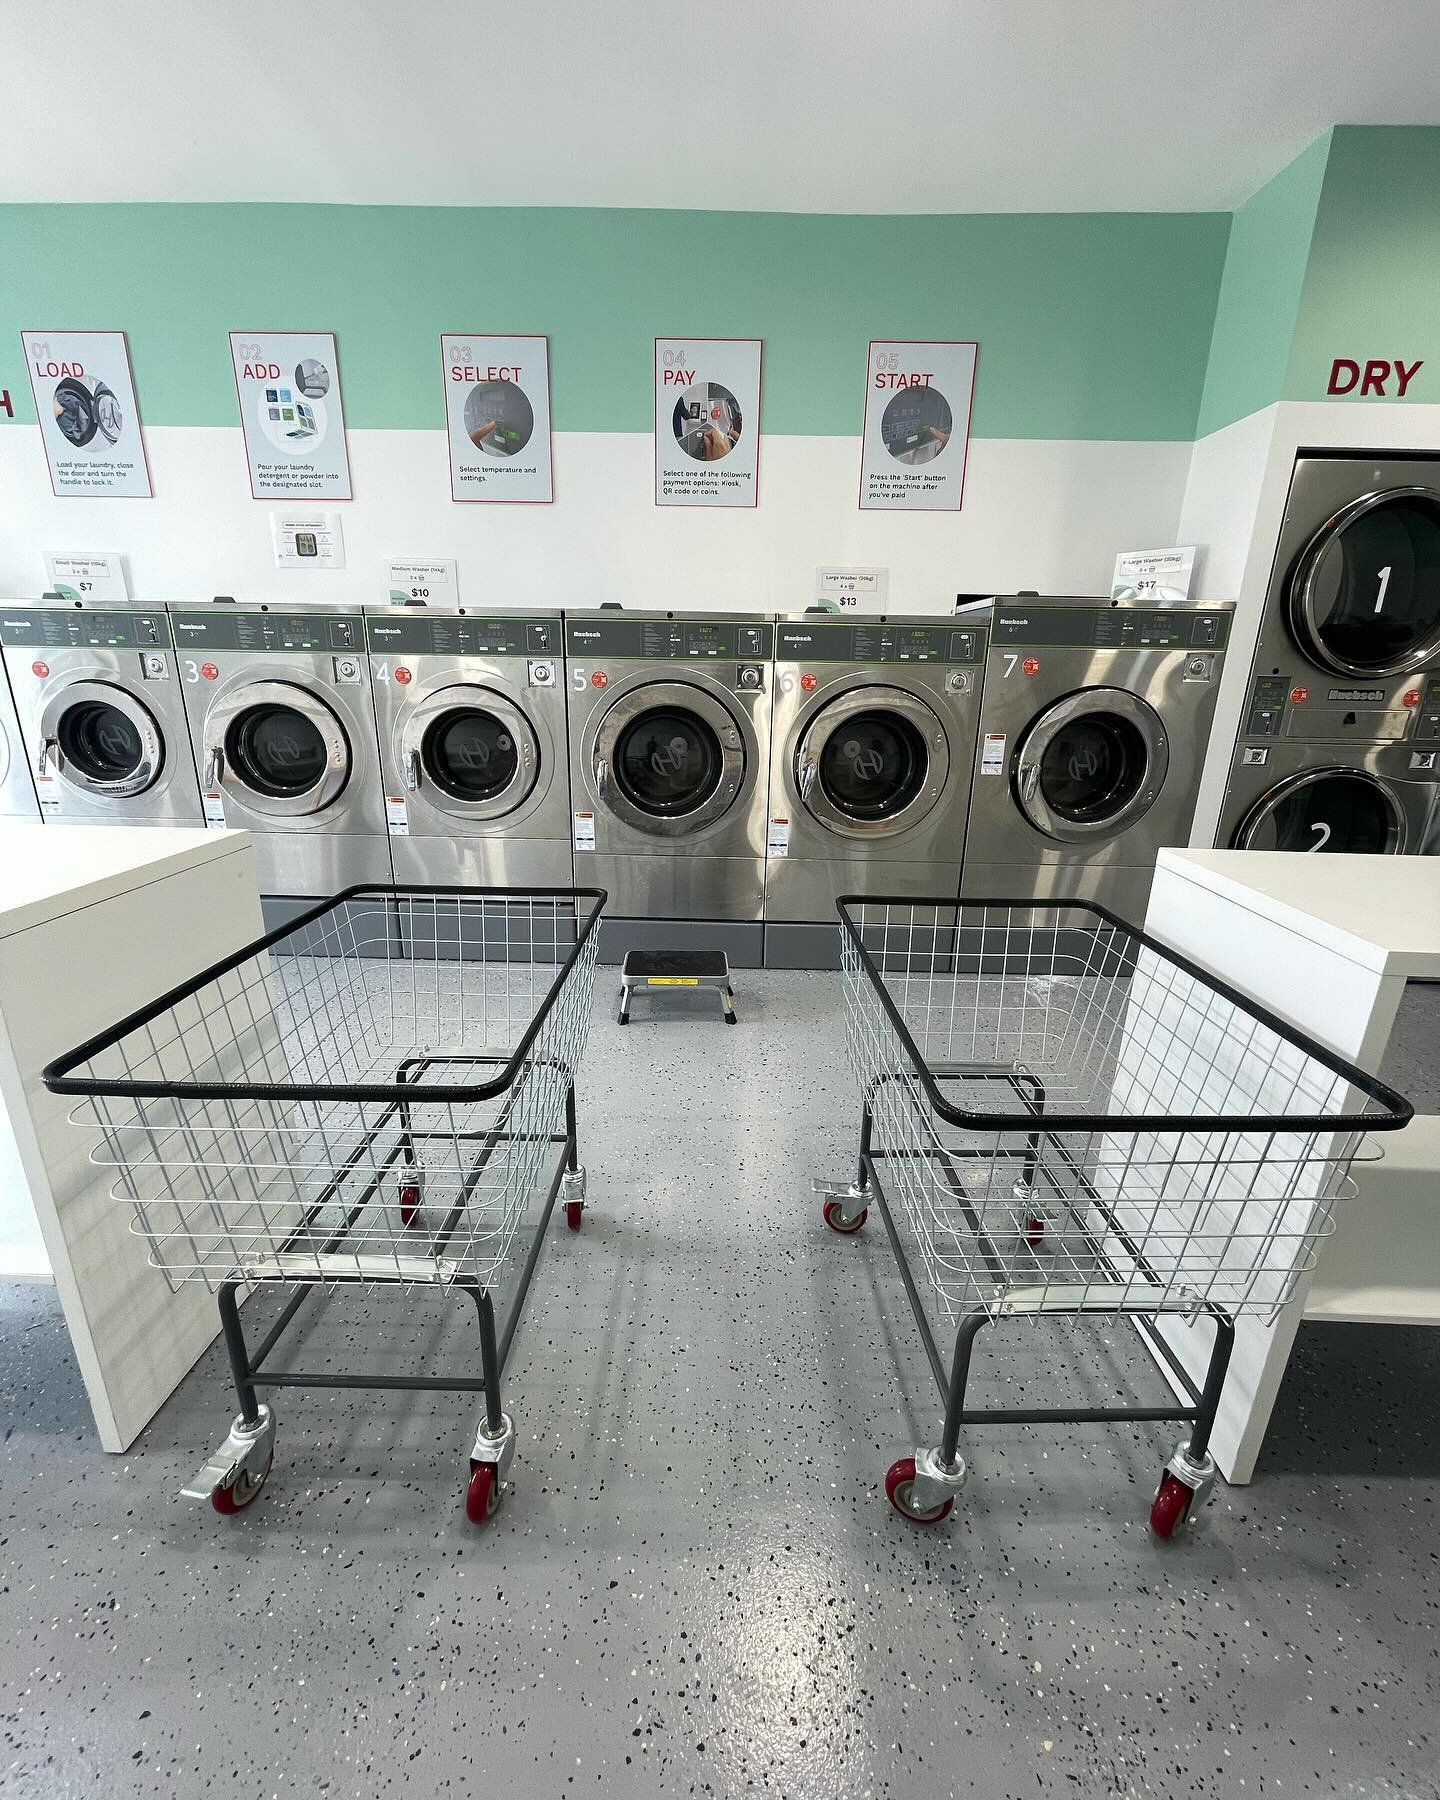 4 UPGRADES WE HAVE MADE THIS MONTH
.
1️⃣ Laundry Carts: No more carrying wet laundry to put into a dryer. Transport months of laundry from wash to dry to car safely 🚗 

2️⃣ Loyalty Program: Use the code on the card, spend up to $100 over your lifeti